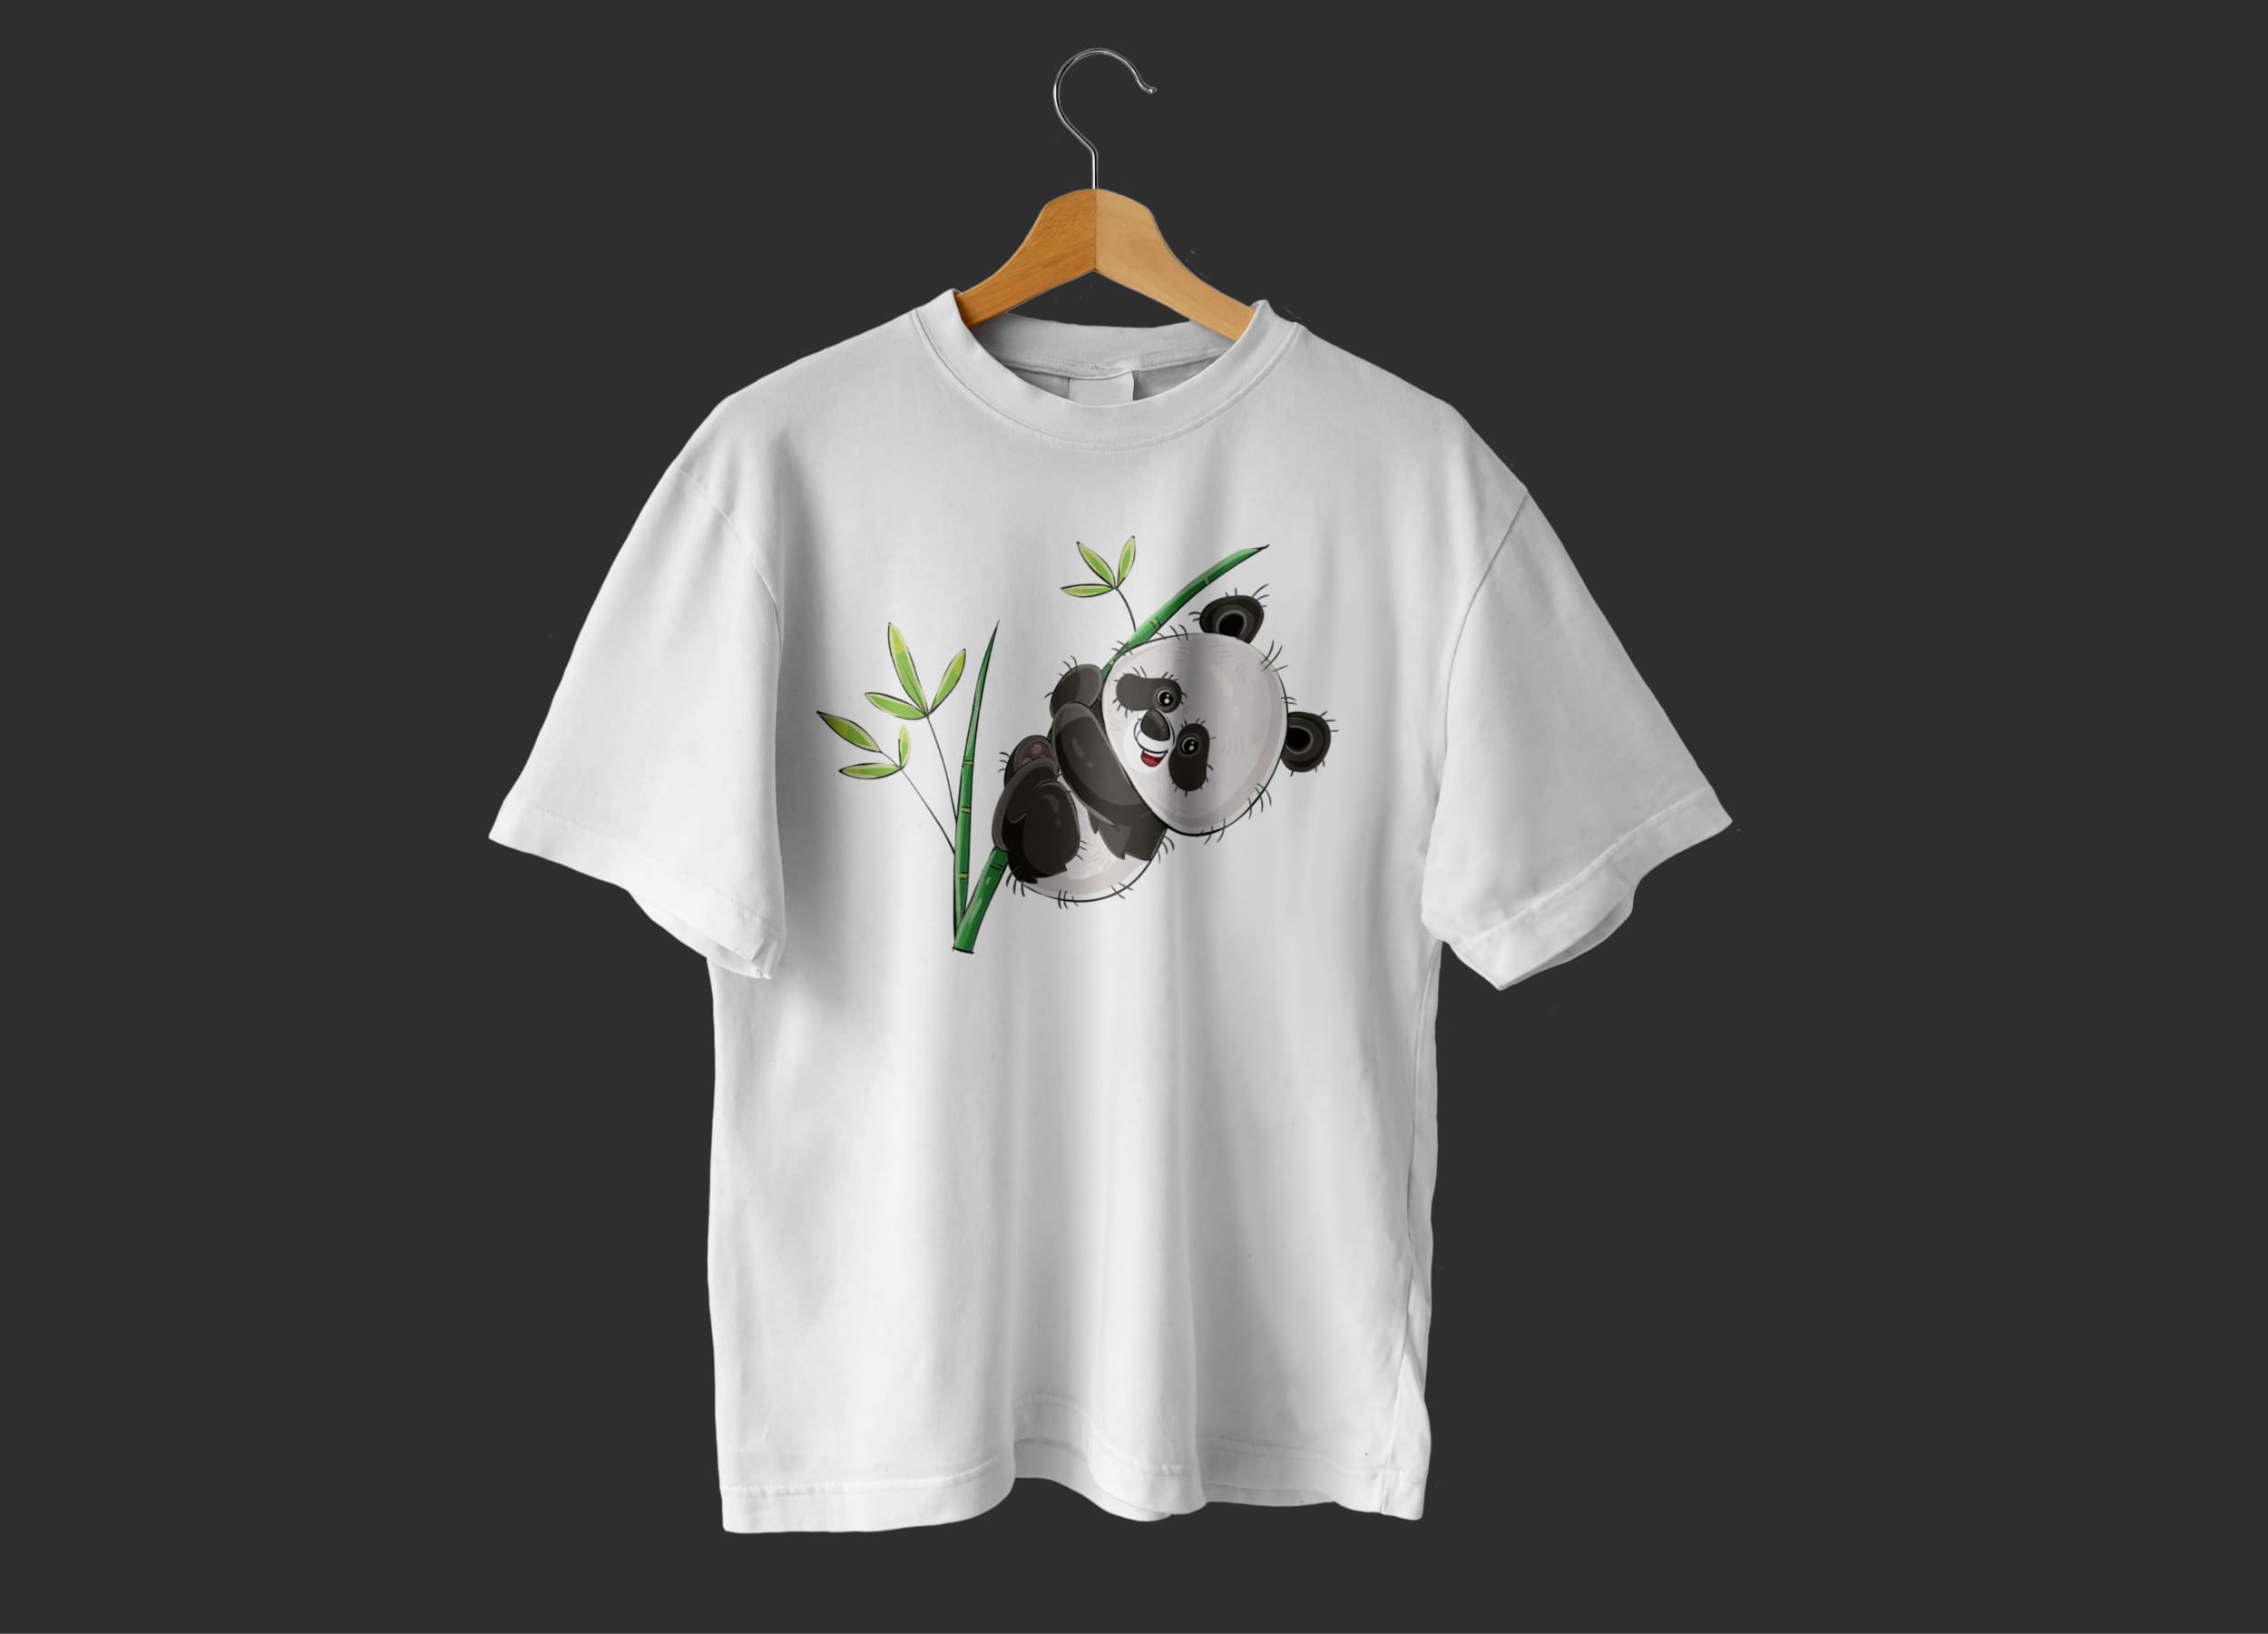 White t-shirt with a baby panda on a wooden hanger on a dark gray background.